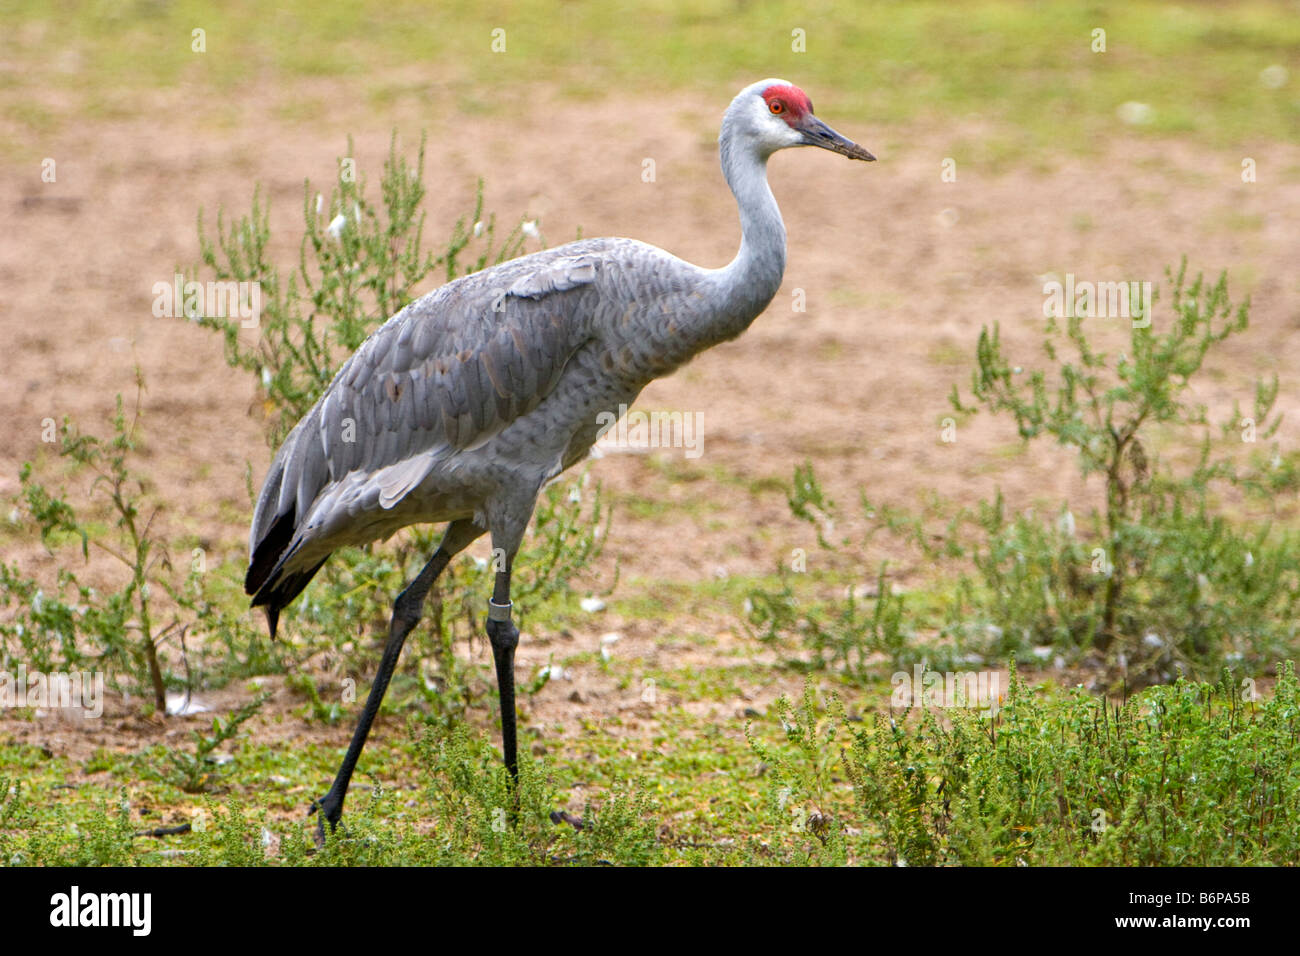 A Sandhill Crane forages for food September 23 2008 Stock Photo